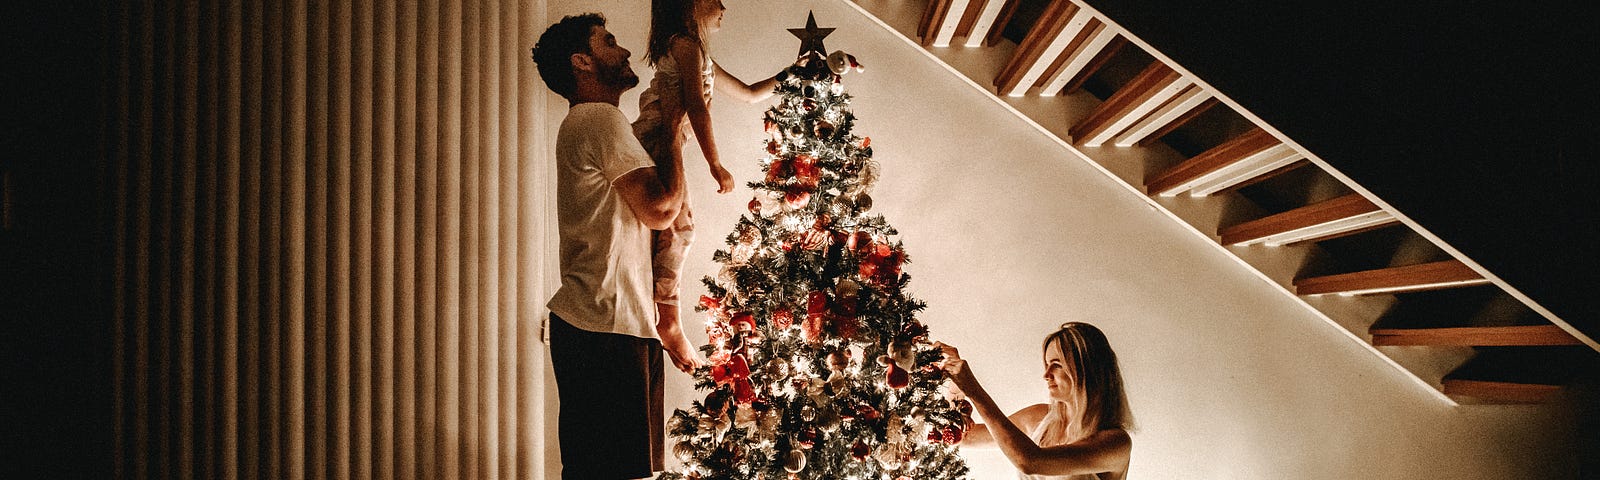 A family decorates a christmas tree. A man holds up a small child so they can place the start atop the tree.